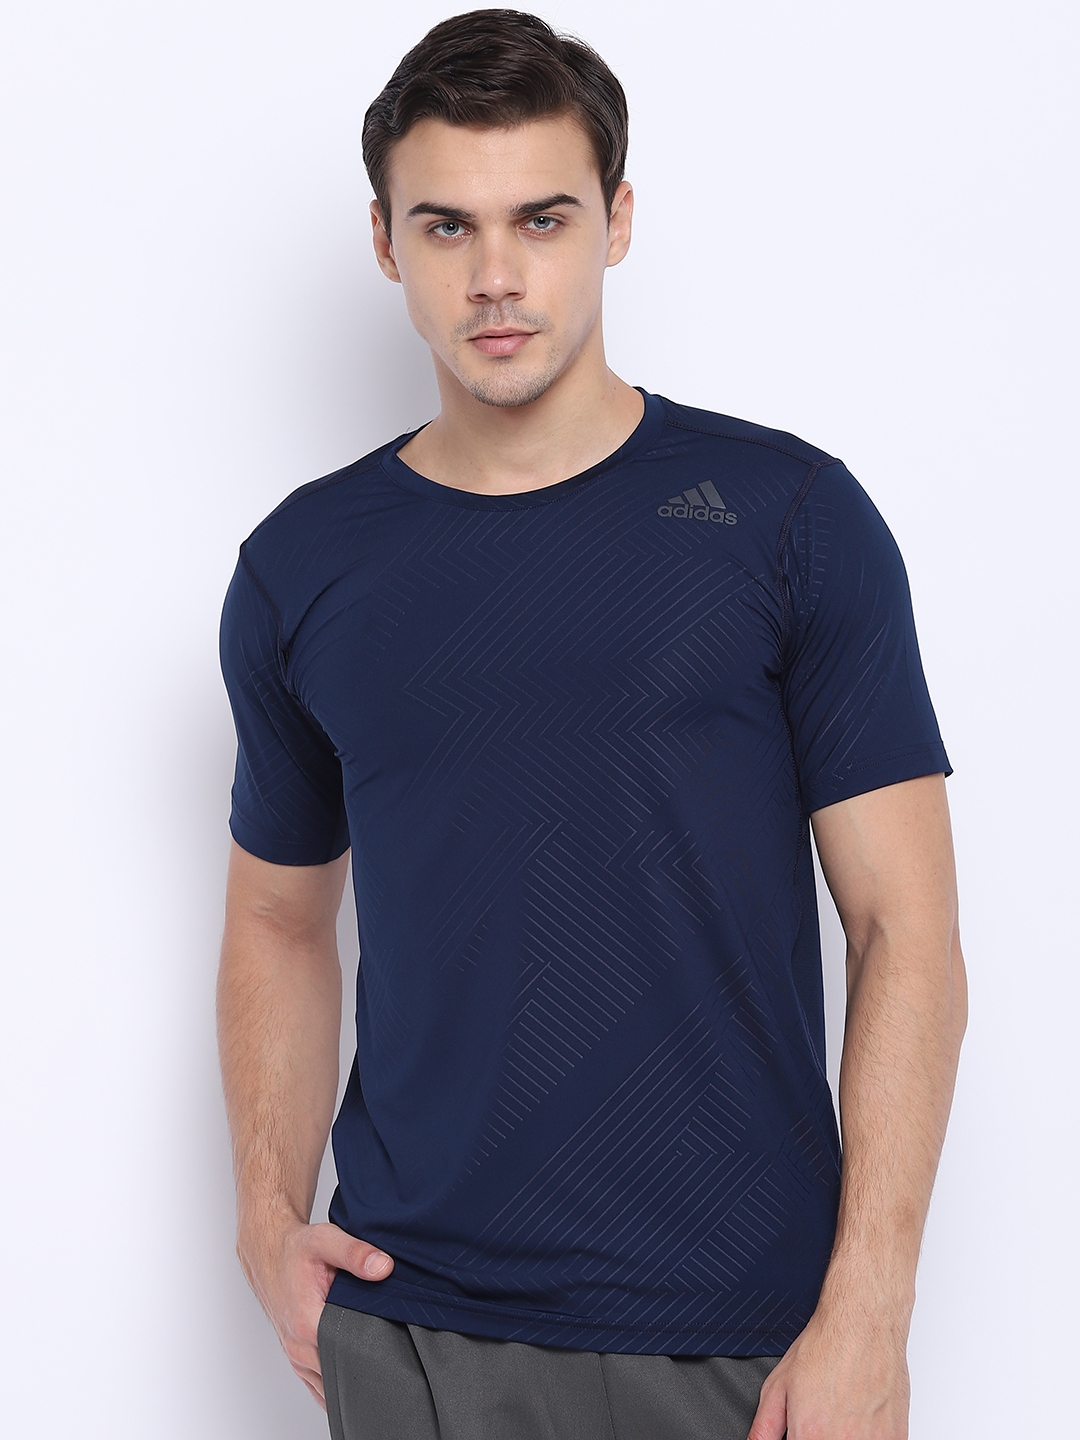 Buy ADIDAS Men Navy Blue & Grey Freelift Fitted Printed Training T ...